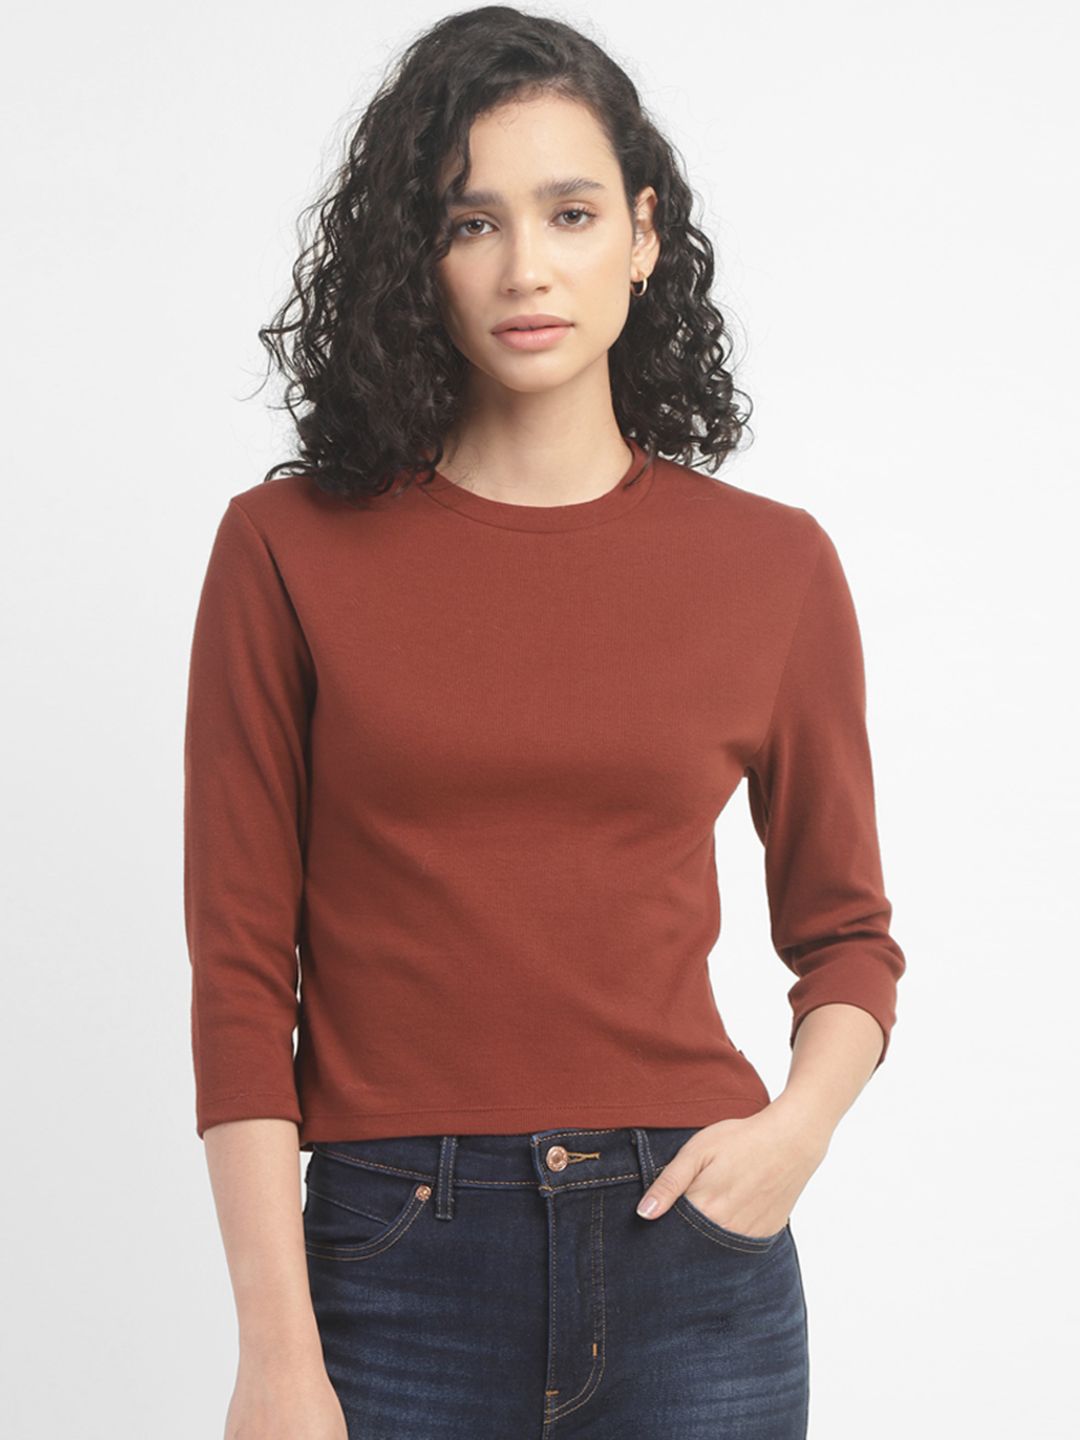 Levis Striped Top Price in India